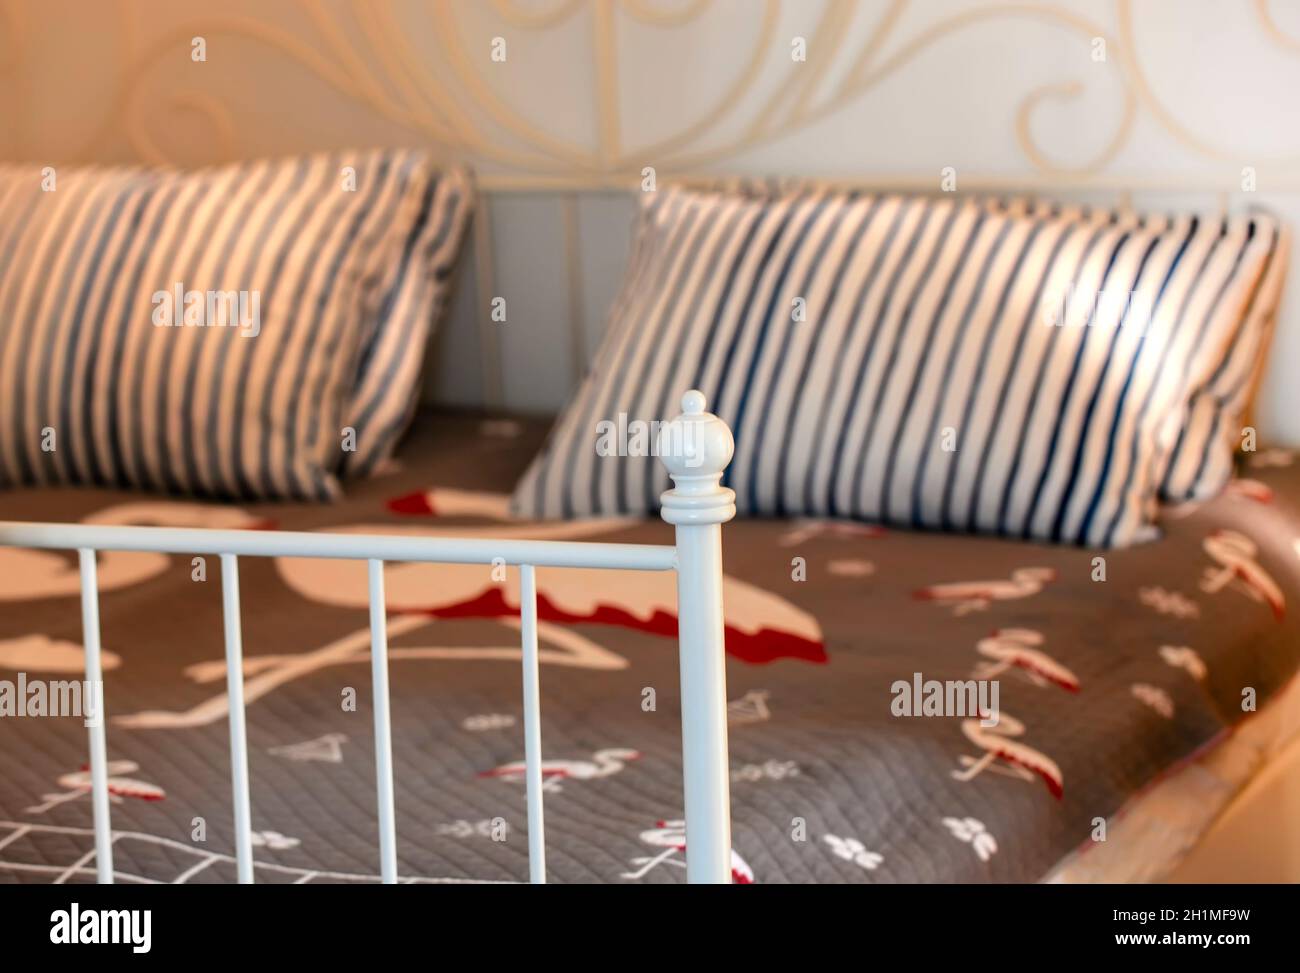 The stylish bedroom interior design with patterned pillows on bed. Selective focus Stock Photo